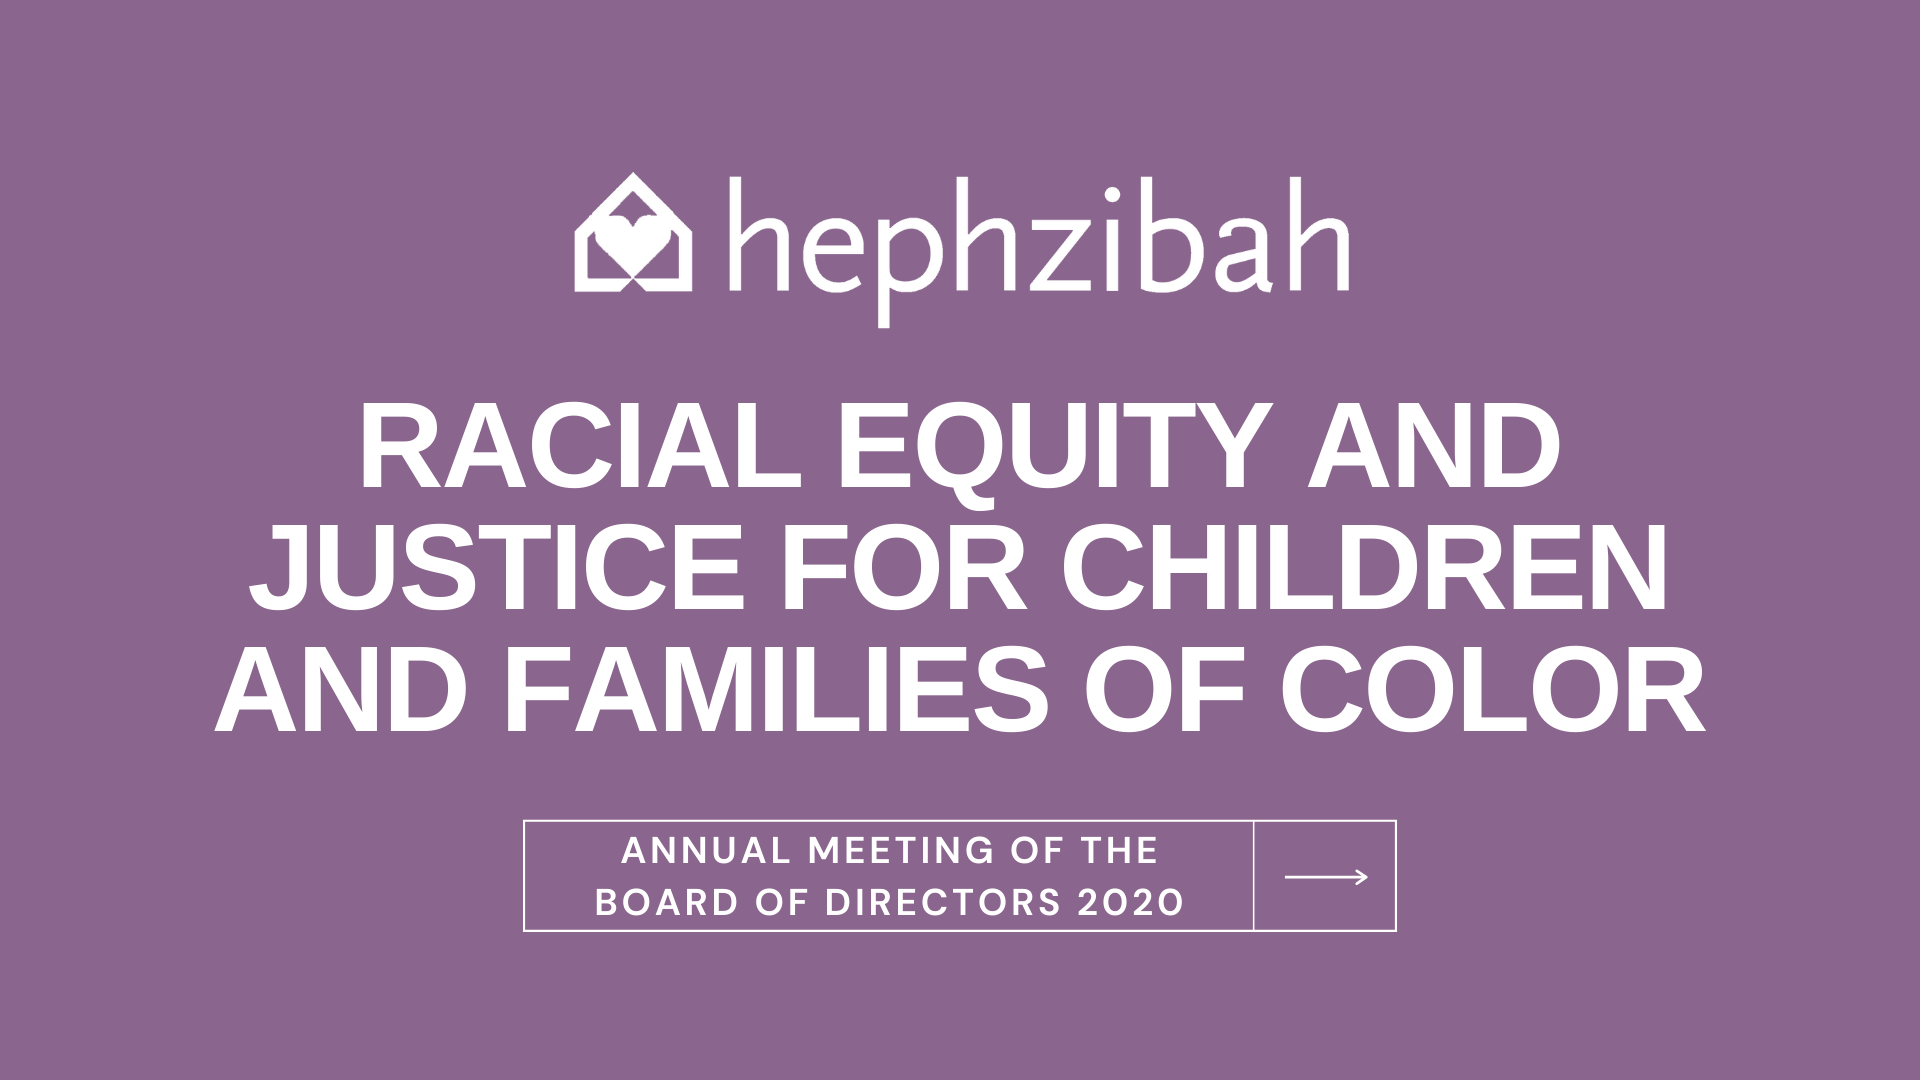 2020 Annual Meeting of the Board of Directors Tackles Equity and Justice